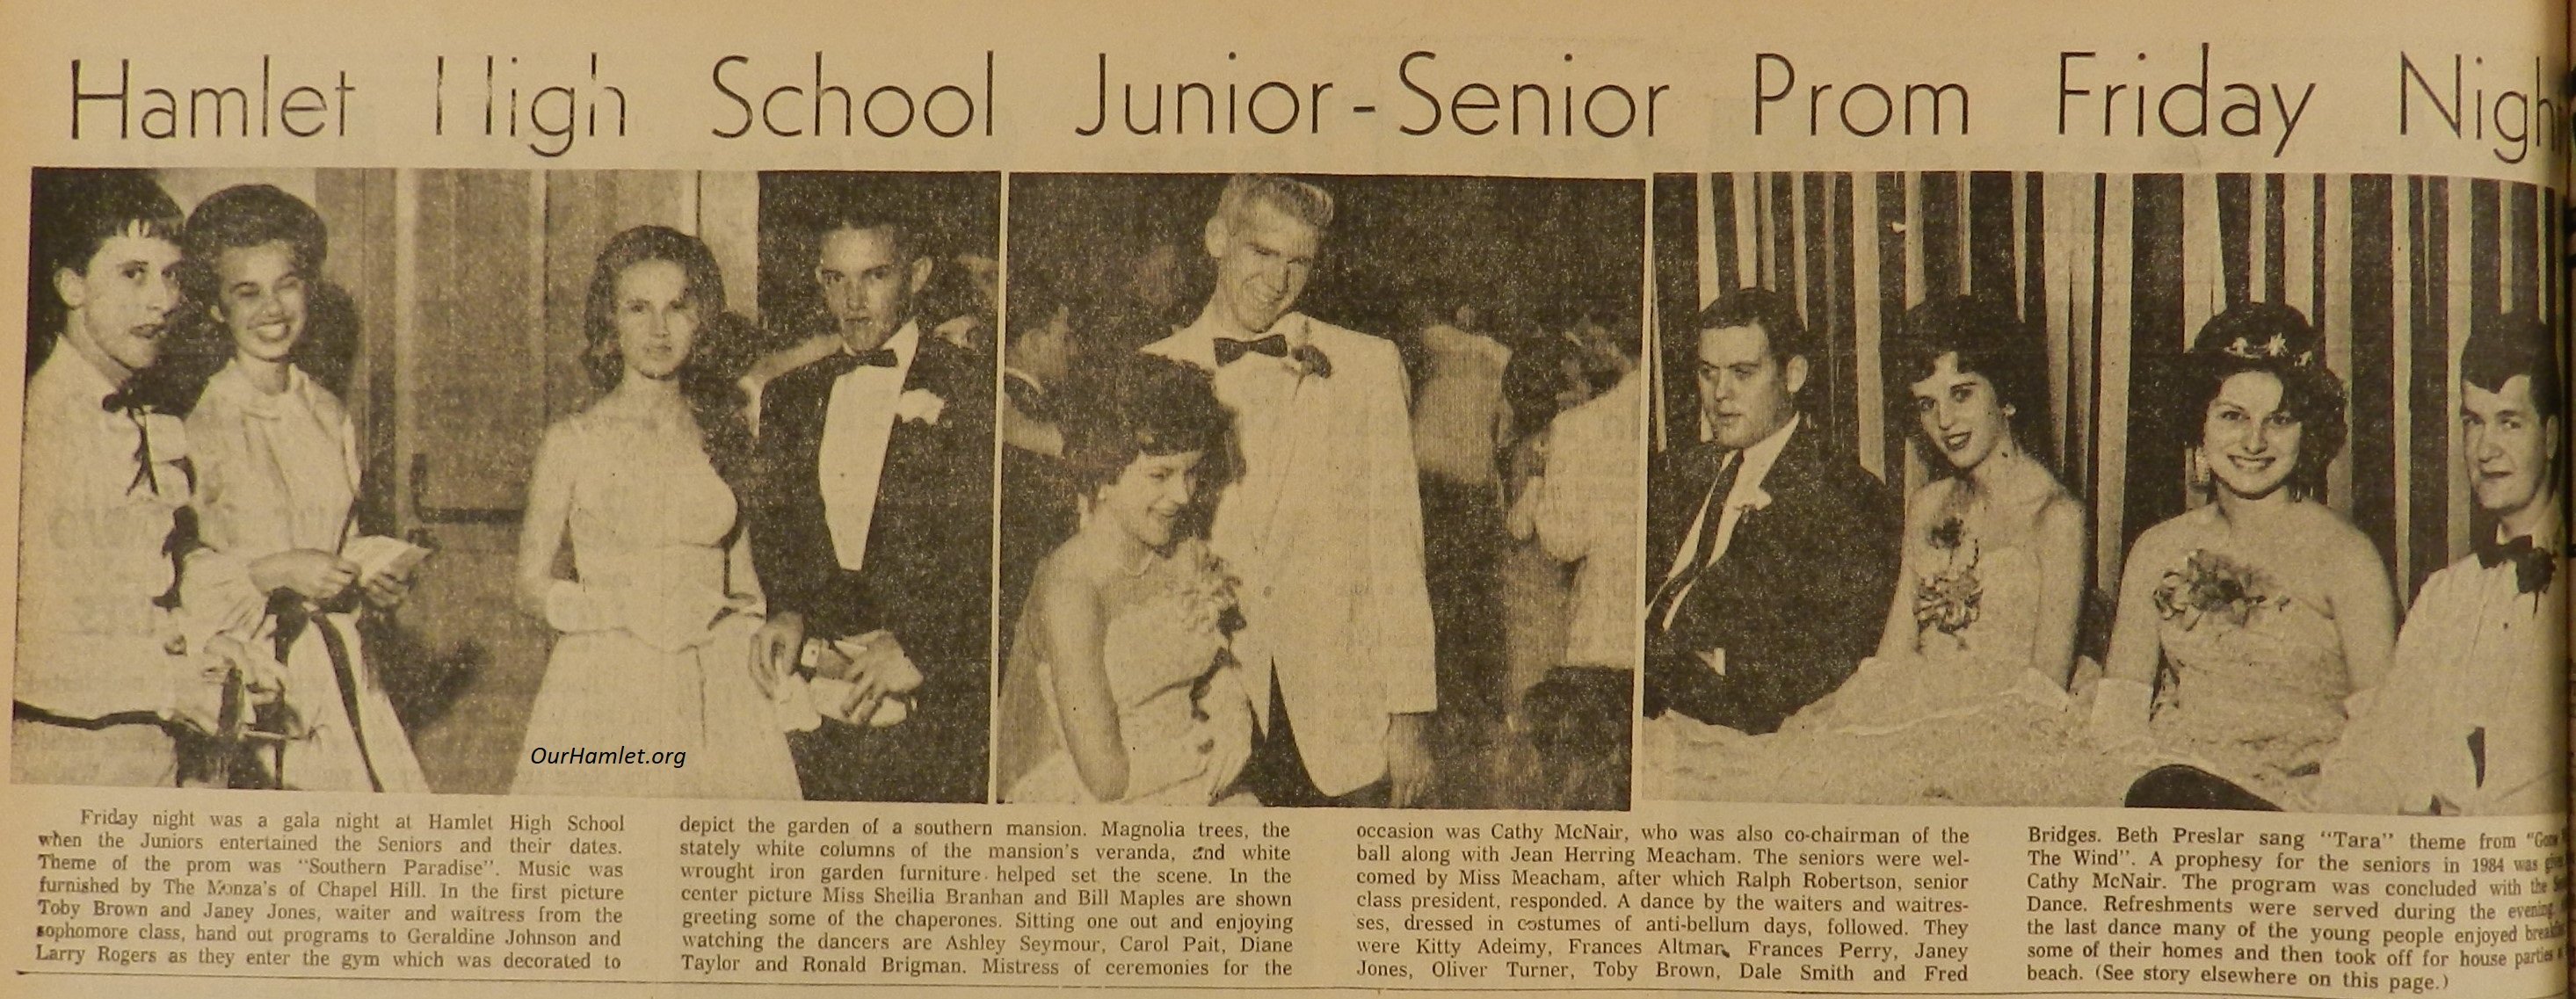 1964 HHS Prom OH.jpg